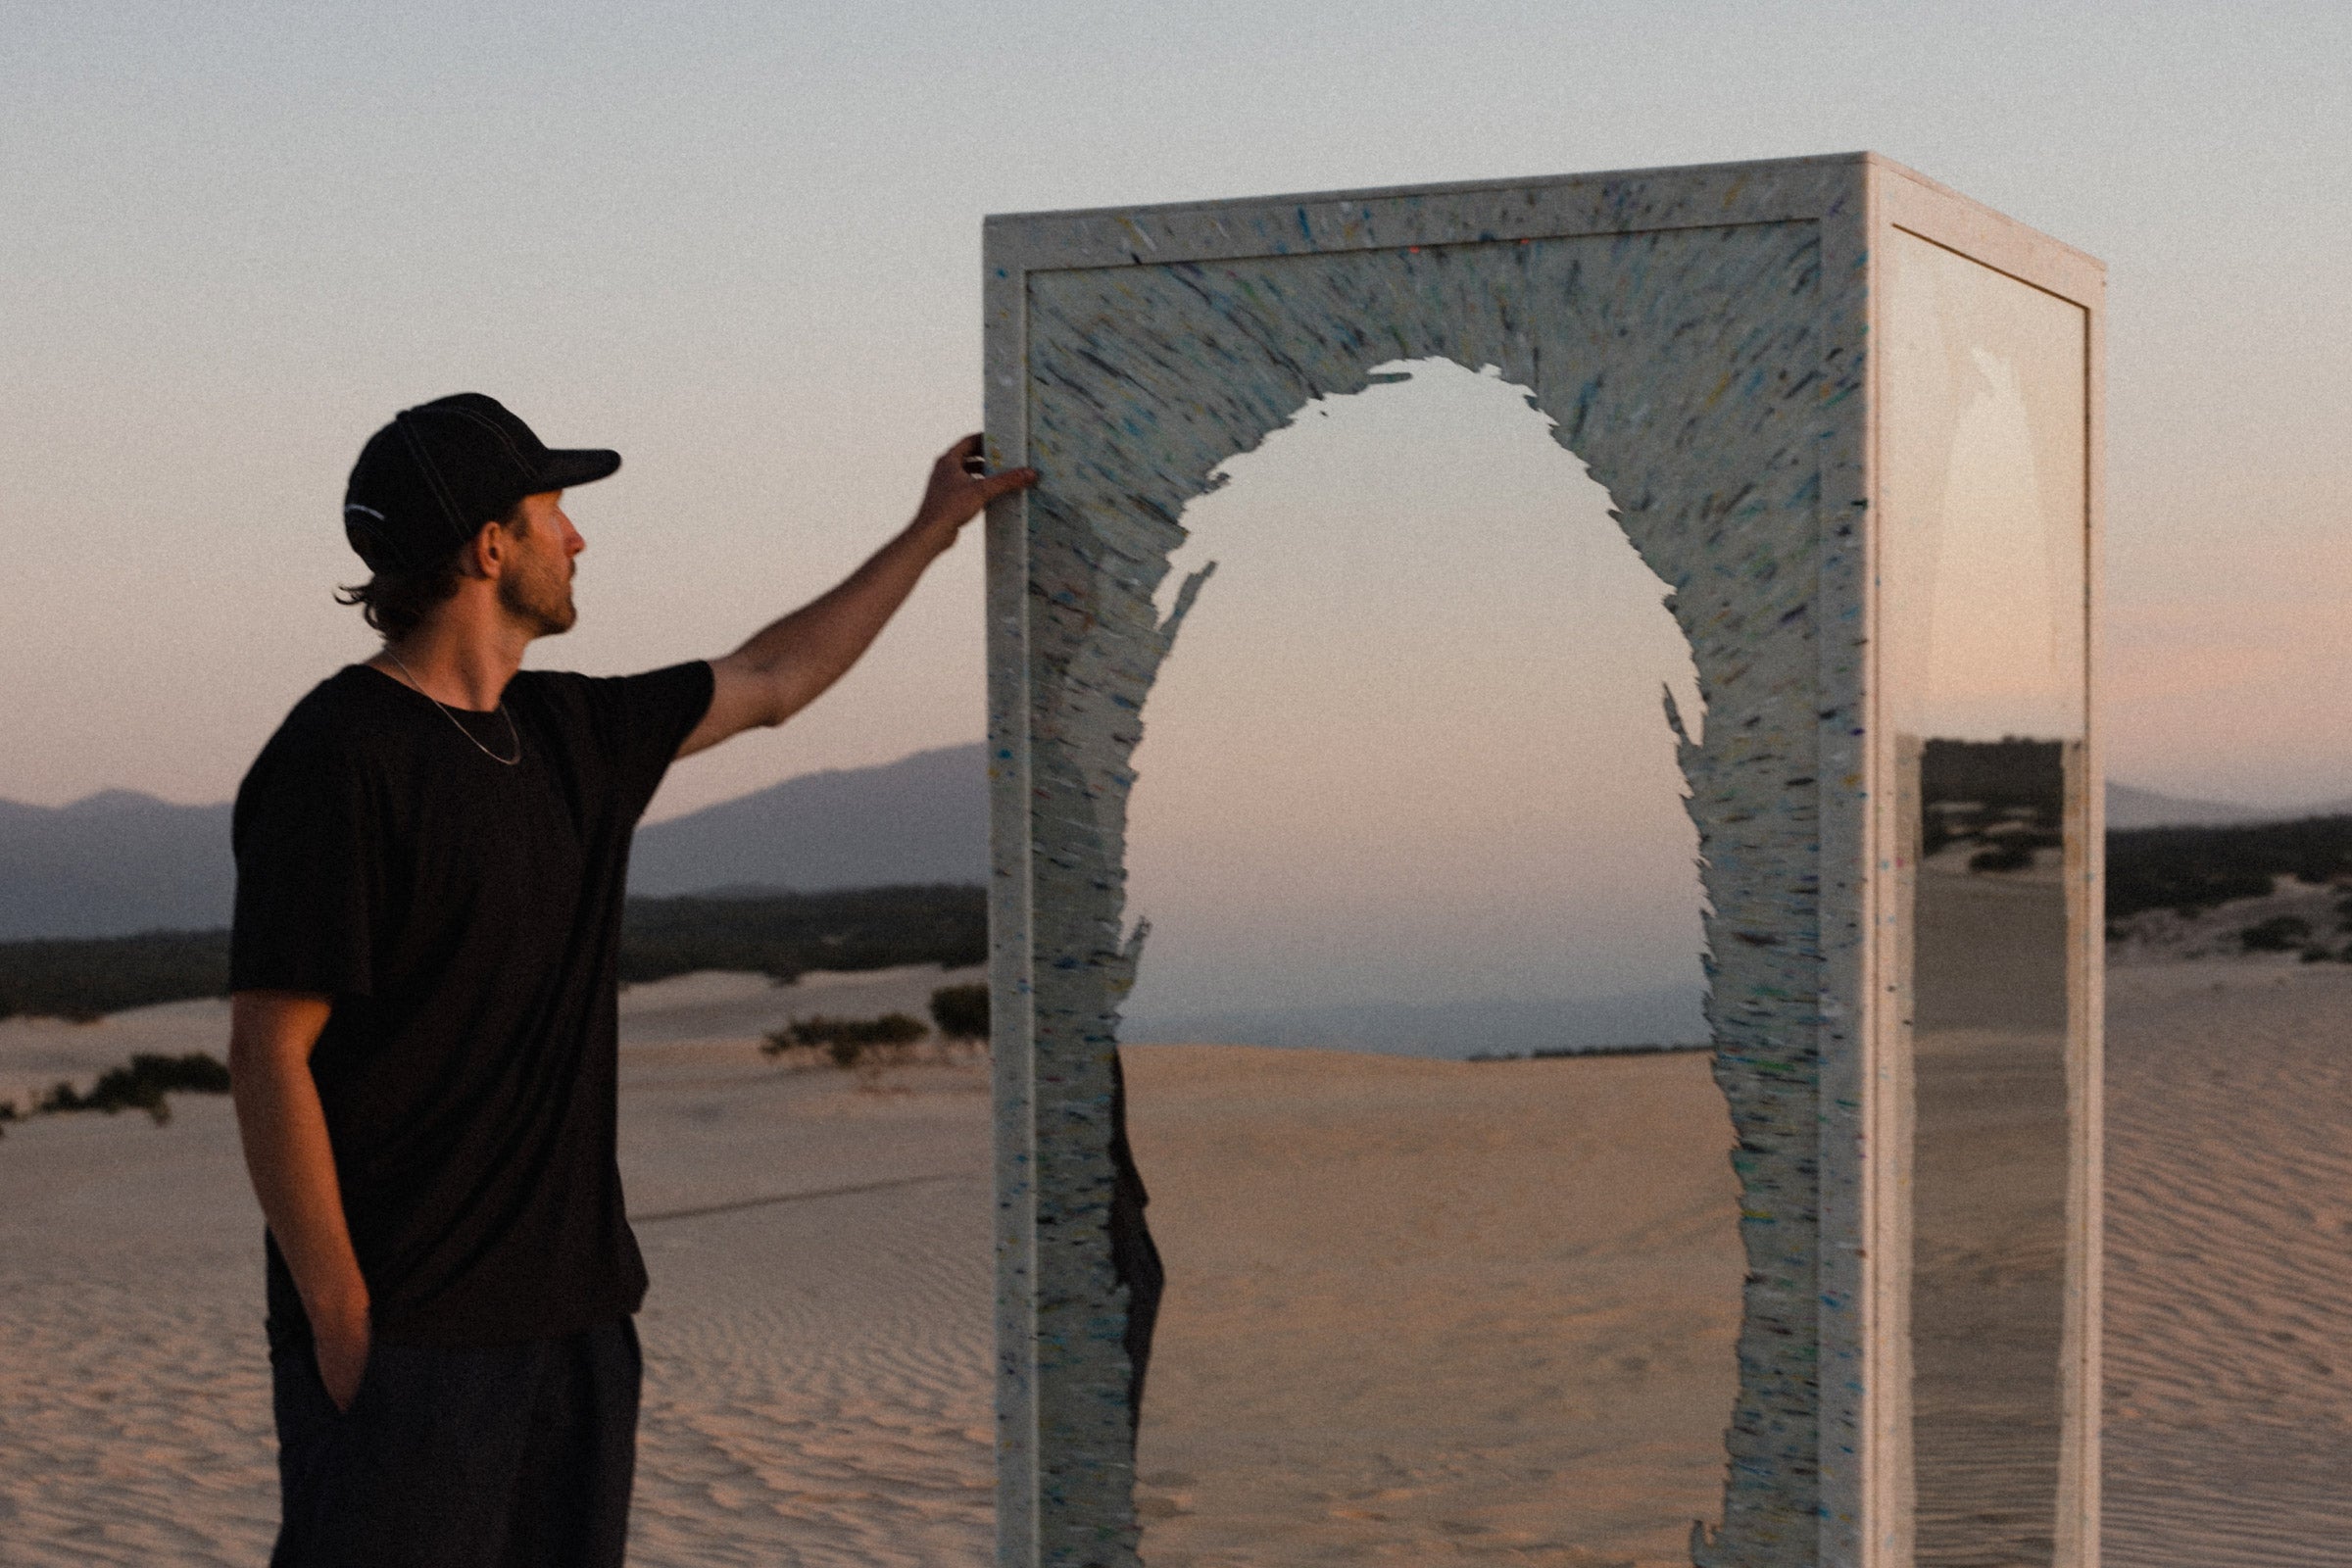 Joshua Space Recycled Void Mirror Sculpture